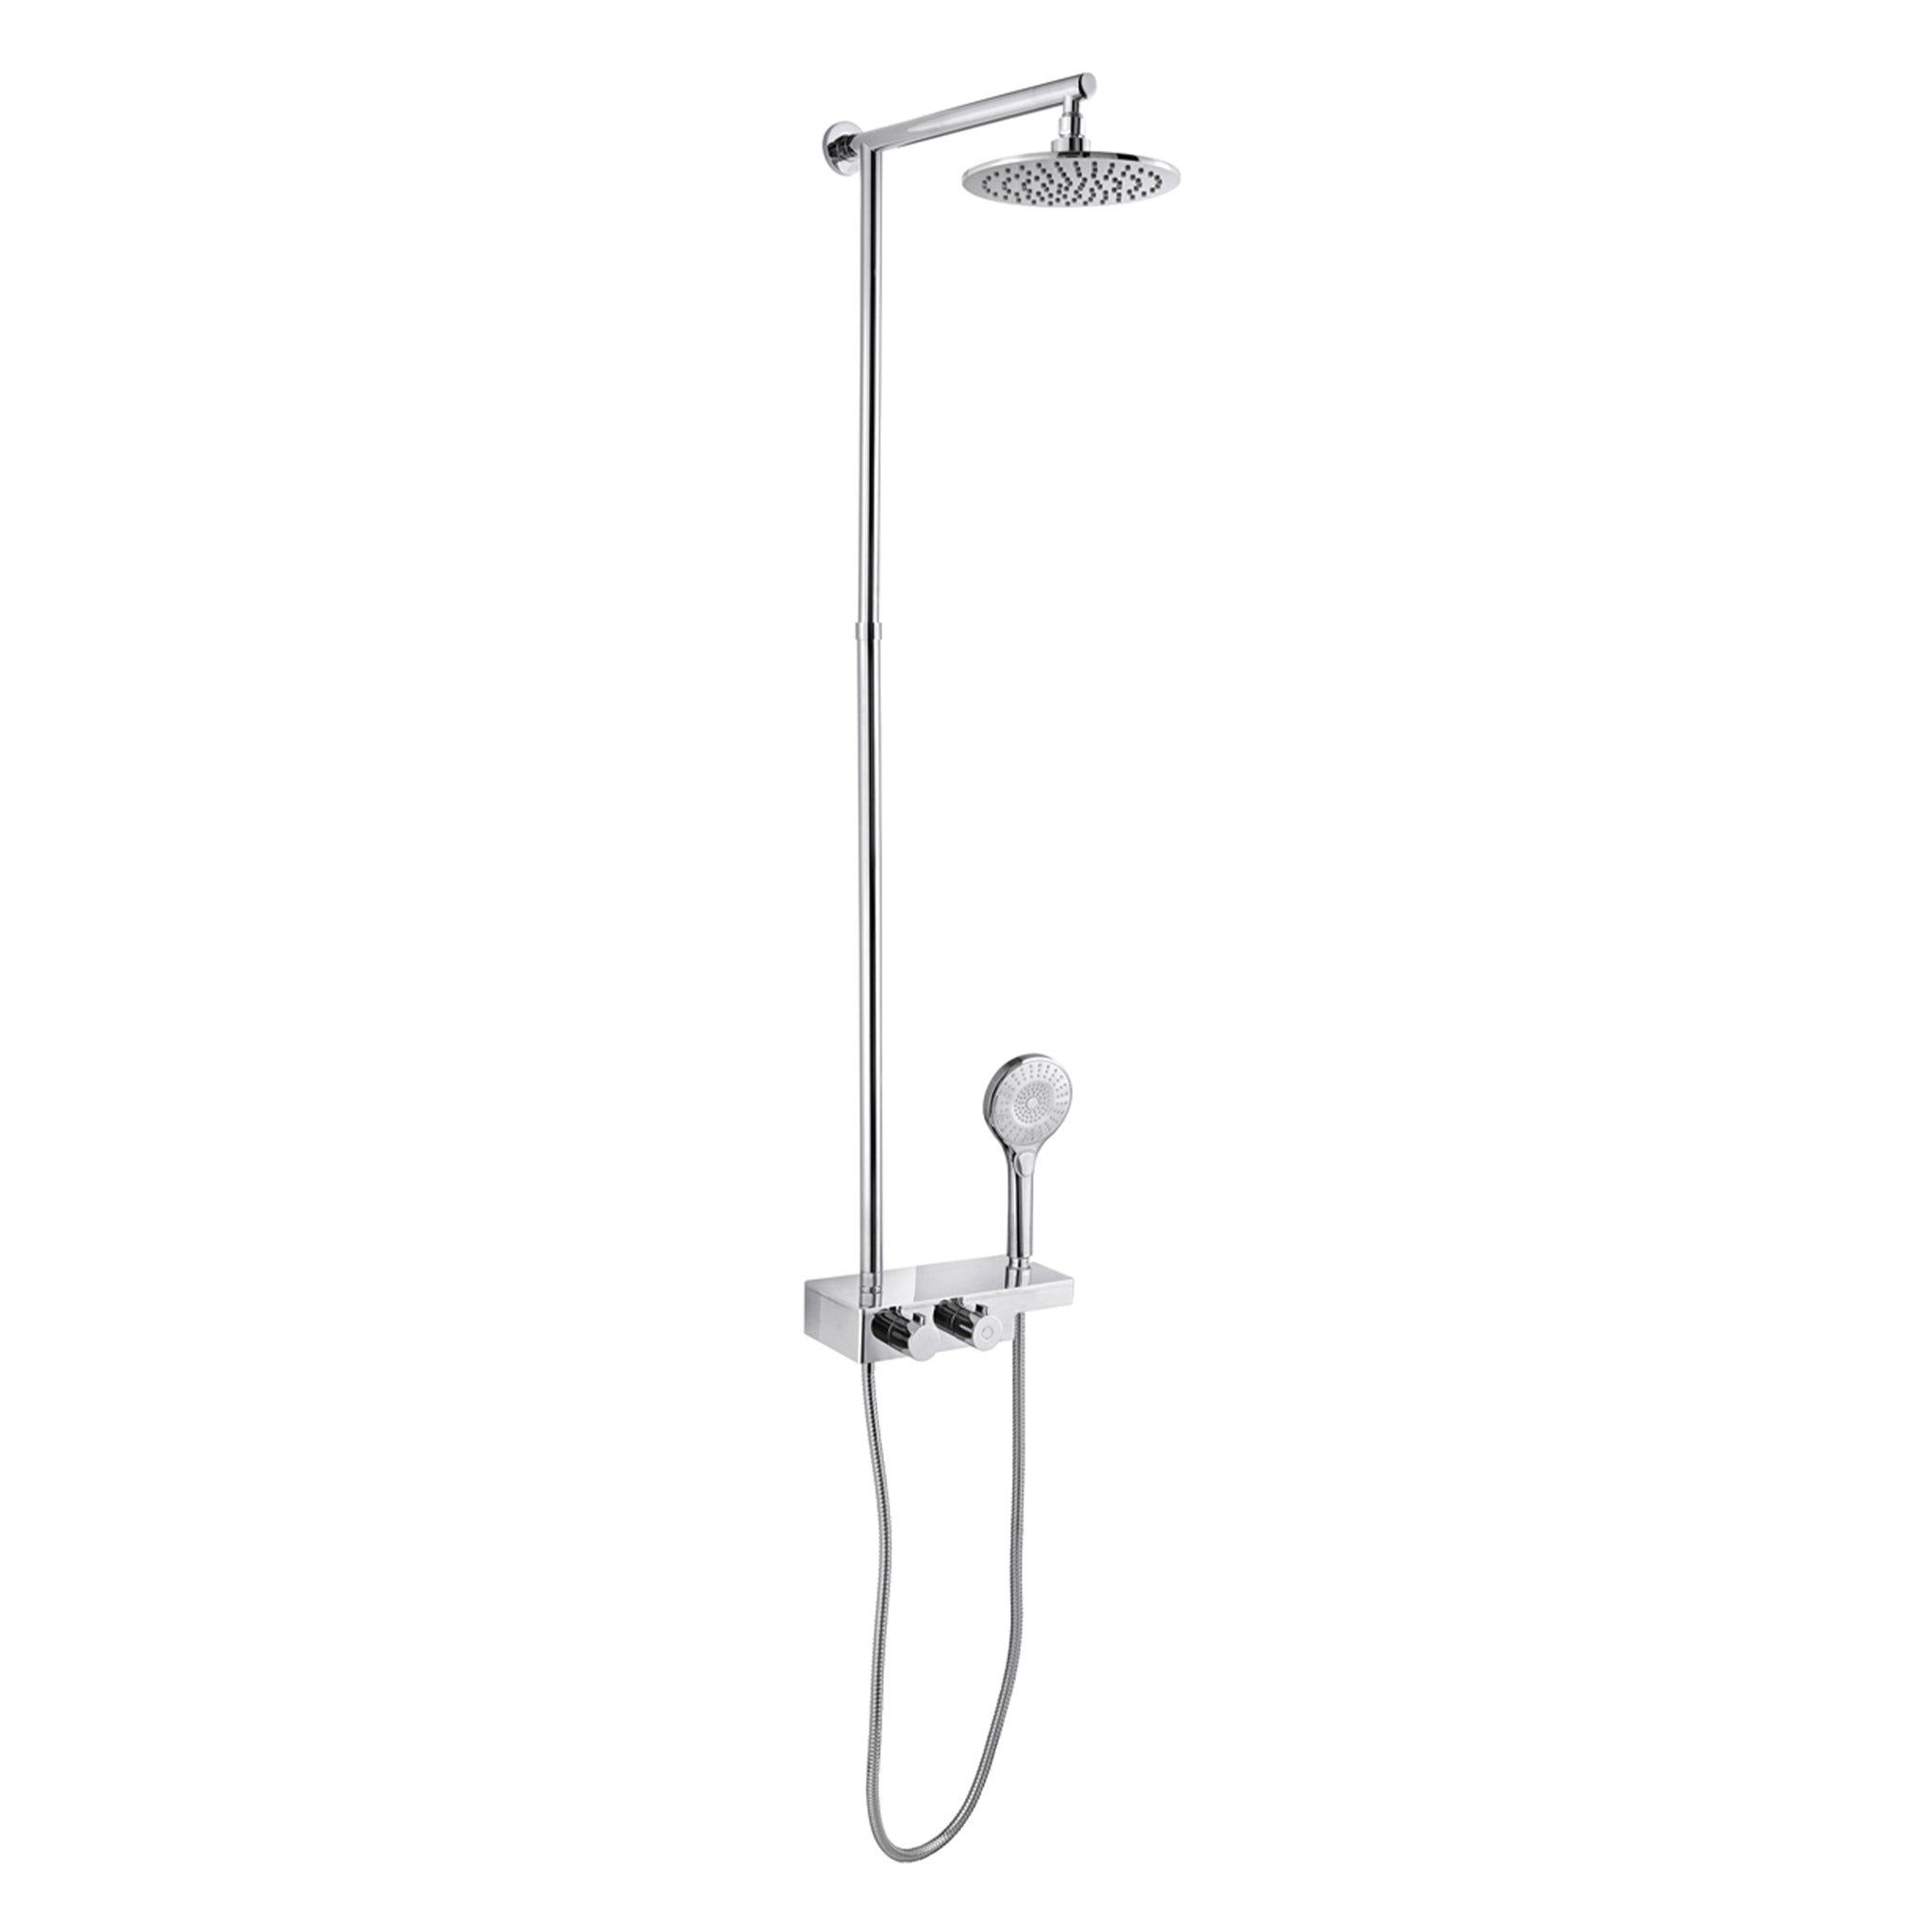 JTP Thermostatic Vertical Shower Rail With Overhead Shower & Push Button Multifunction Shower Hand Set